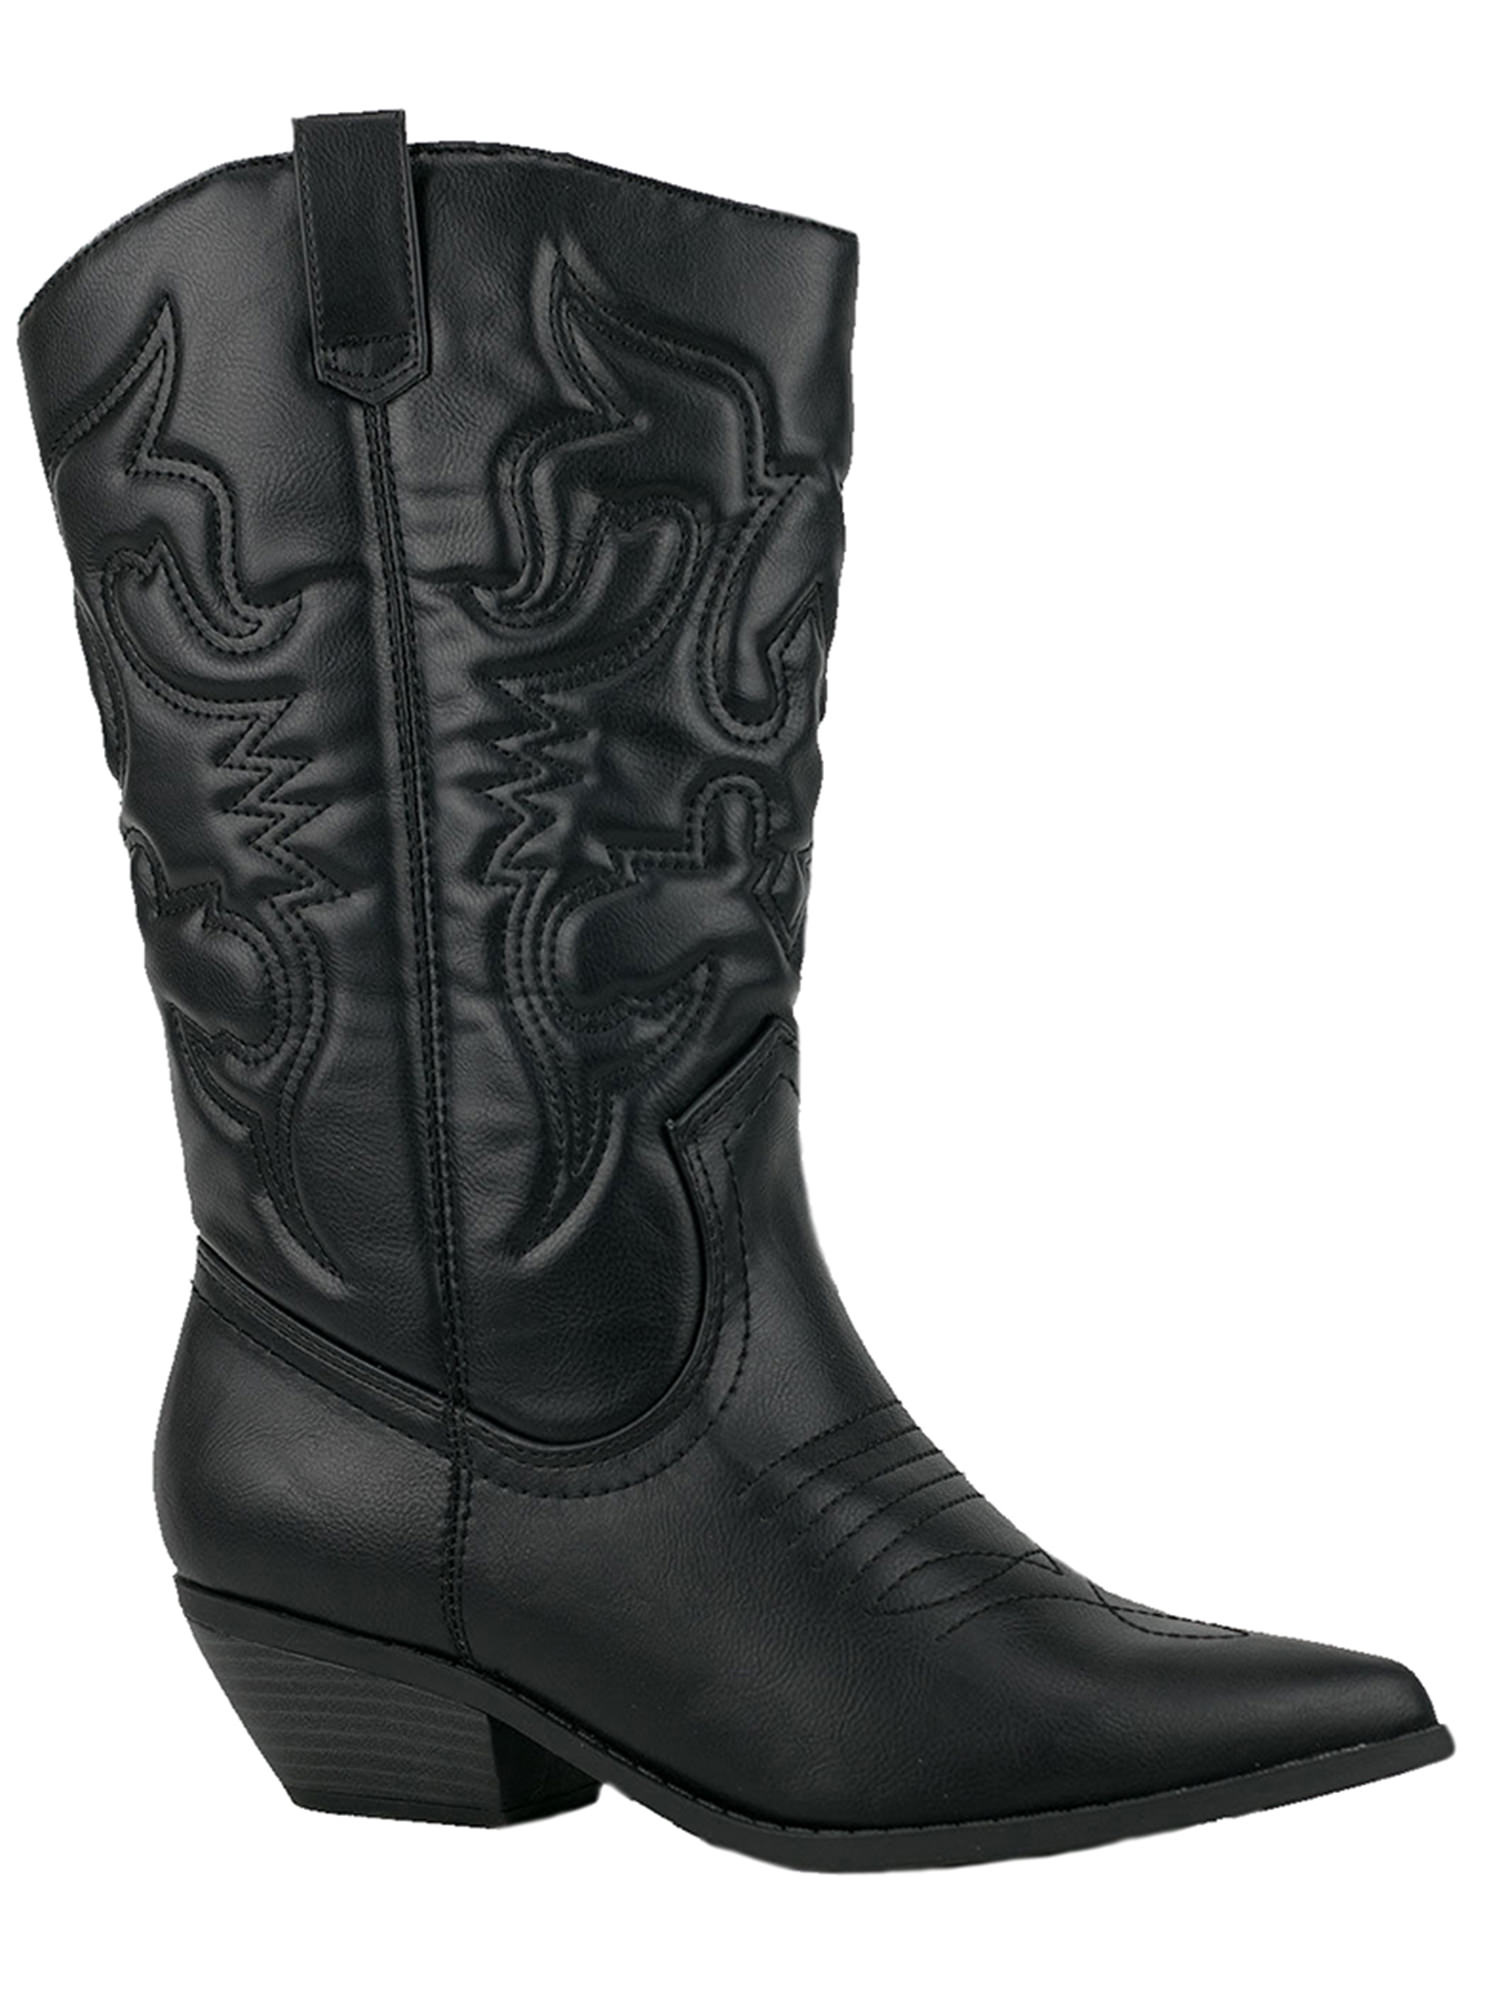 Reno Black Soda Cowboy Western Stitched Boots Women Cowgirl Boots Pointy Toe Knee High - image 2 of 3